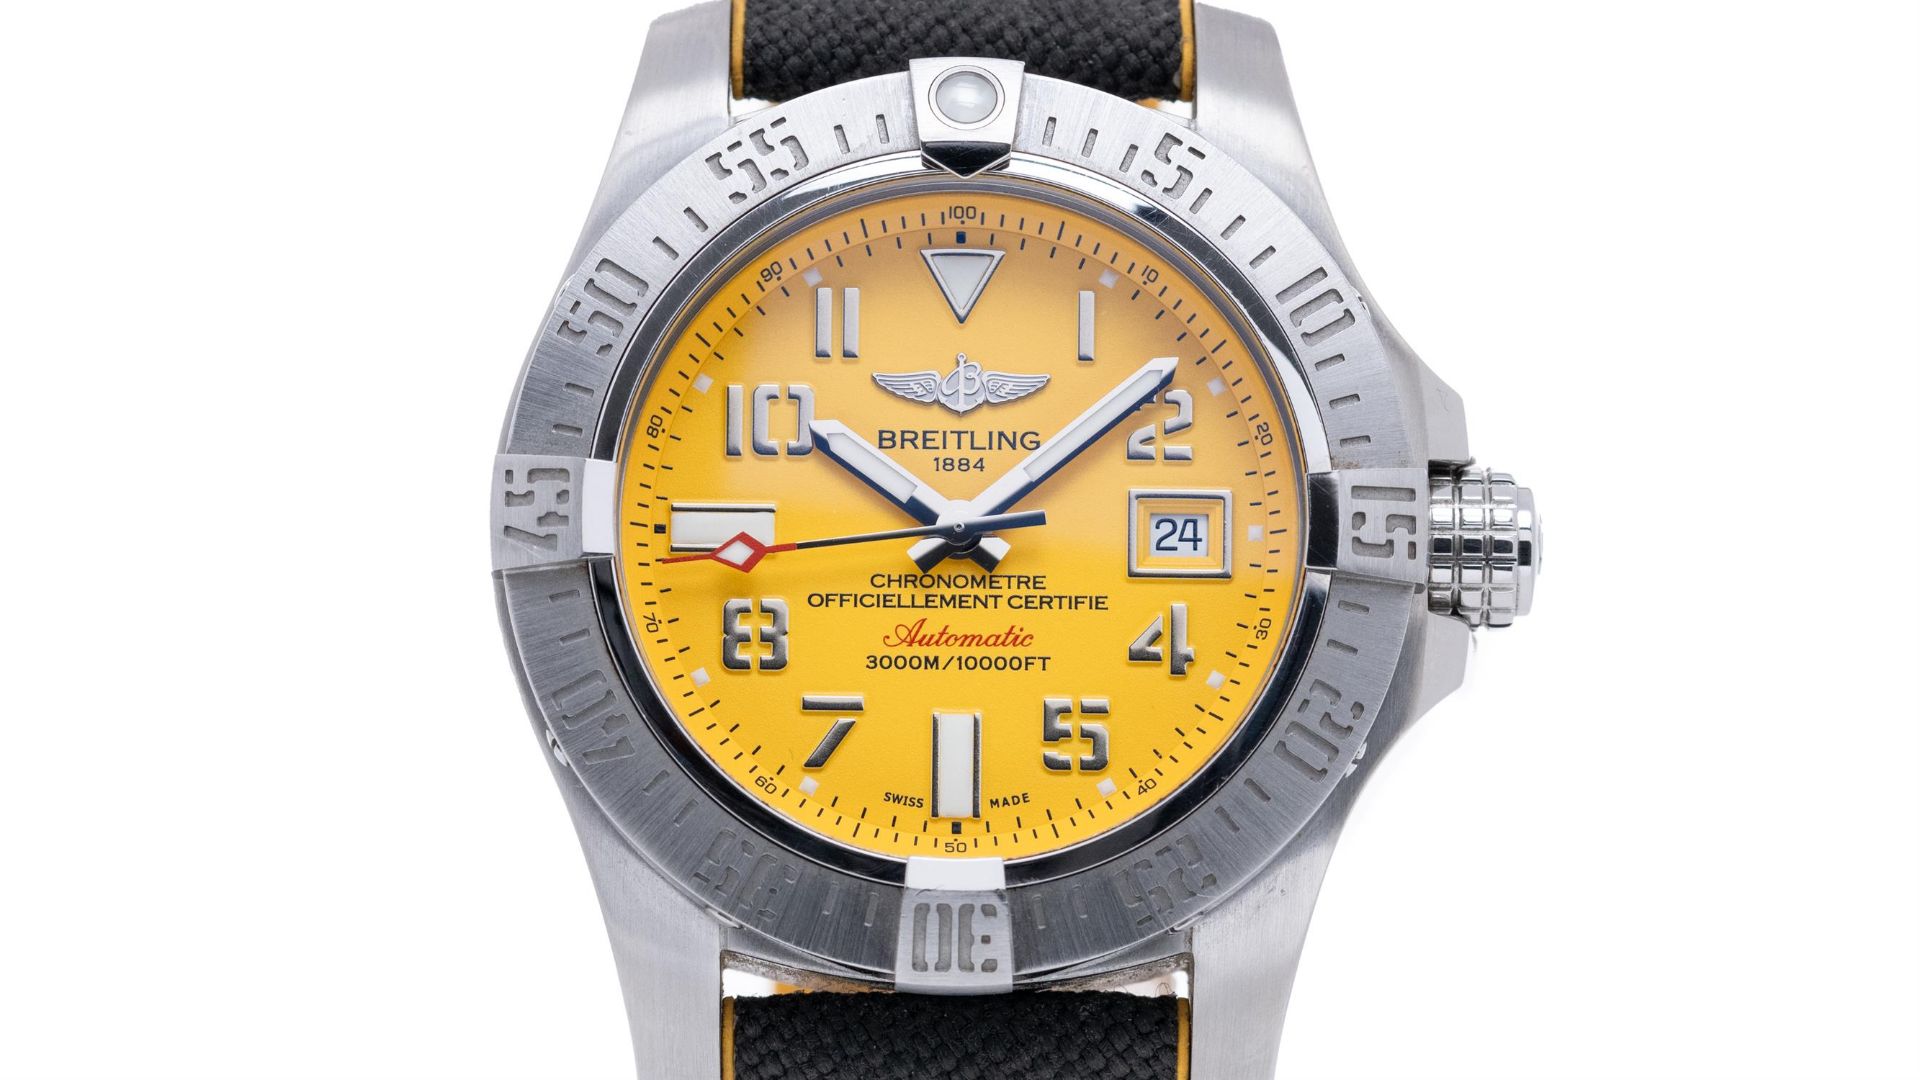 2018 Breitling Avenger II Complete with Box and Papers - Image 5 of 5